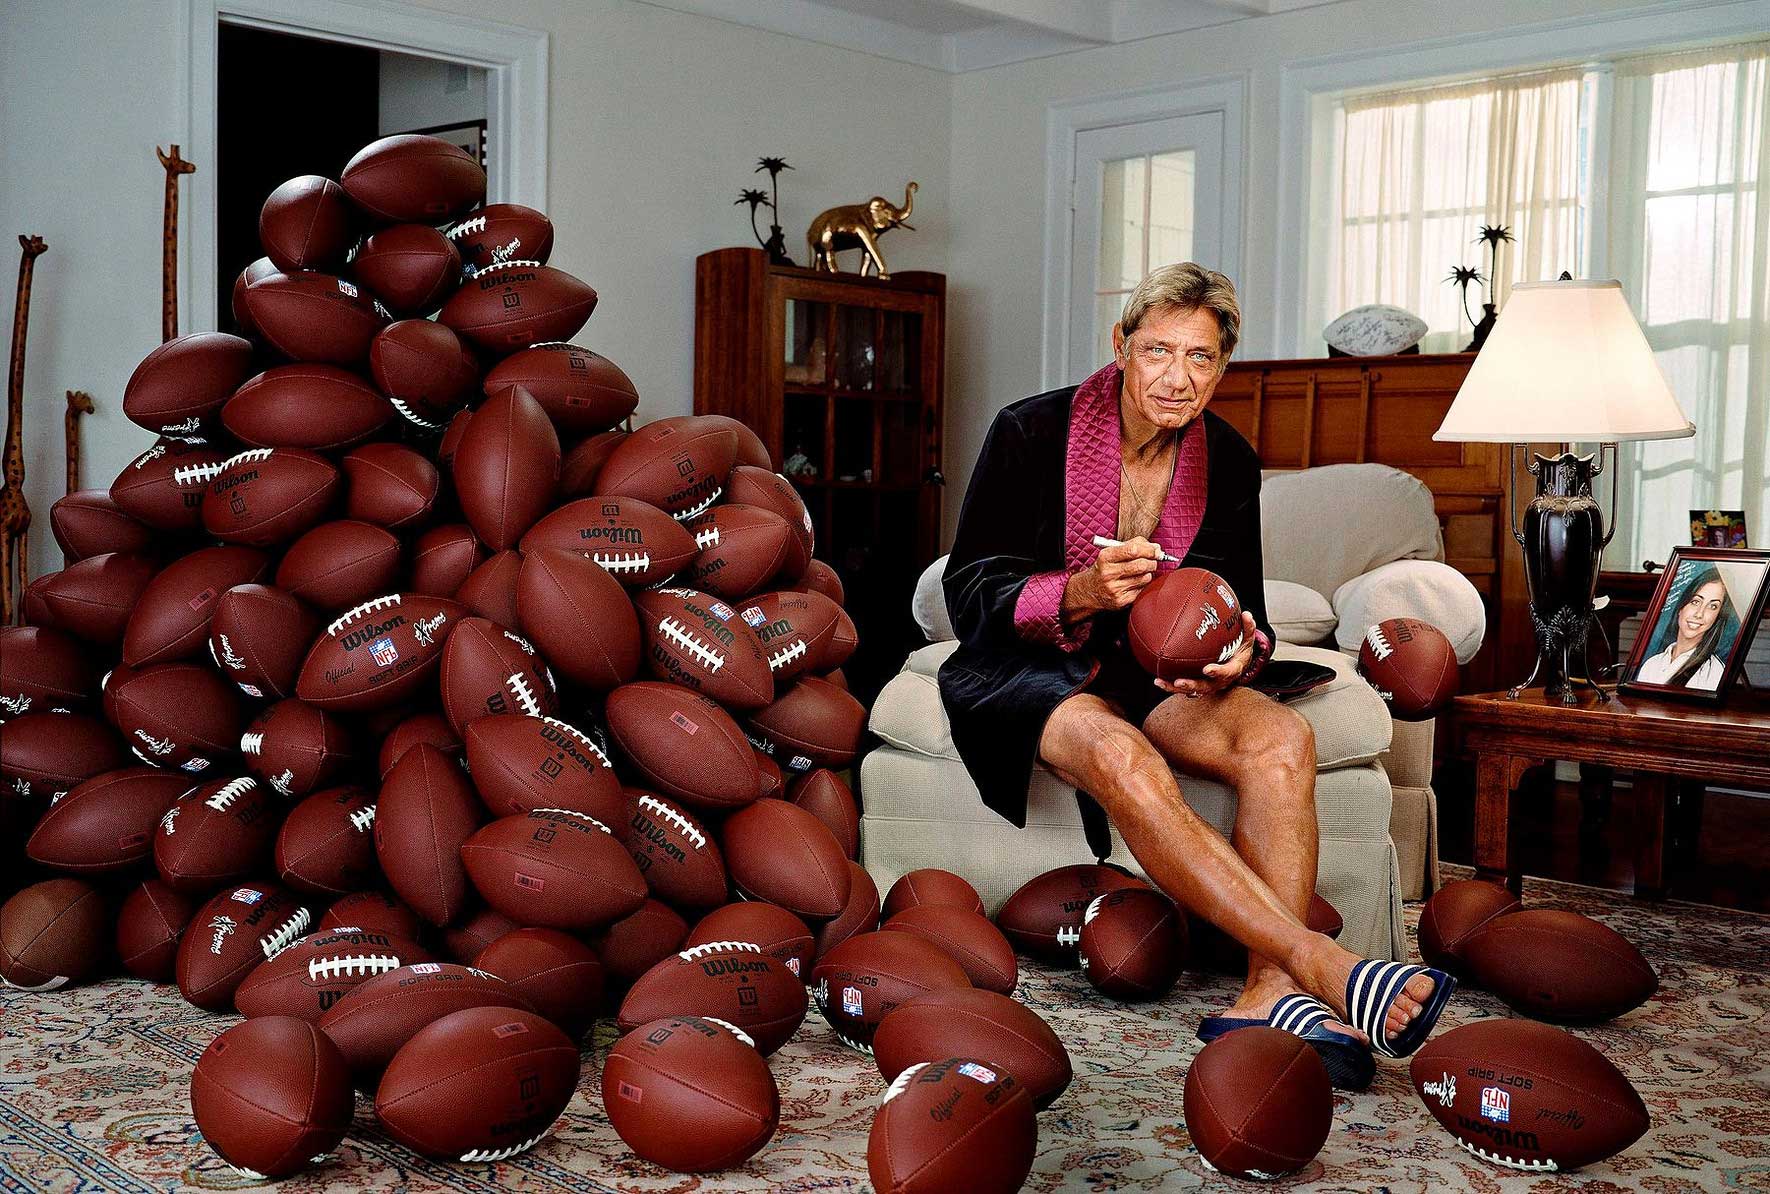 Joe Namath."Again [being from Germany], I had never heard of him before. What retired athletes do, the famous ones, is they often sign baseballs and footballs. I thought: 'How funny would put be if he was beside a pile of footballs signing them?' We set up the balls. It's one frame. There is no retouching on them.It was for GQ so normally he would be looking sharp in a suit [but] it was in Florida and I brought that robe. He is a funny, outgoing guy, so I thought it would suit him perfectly."